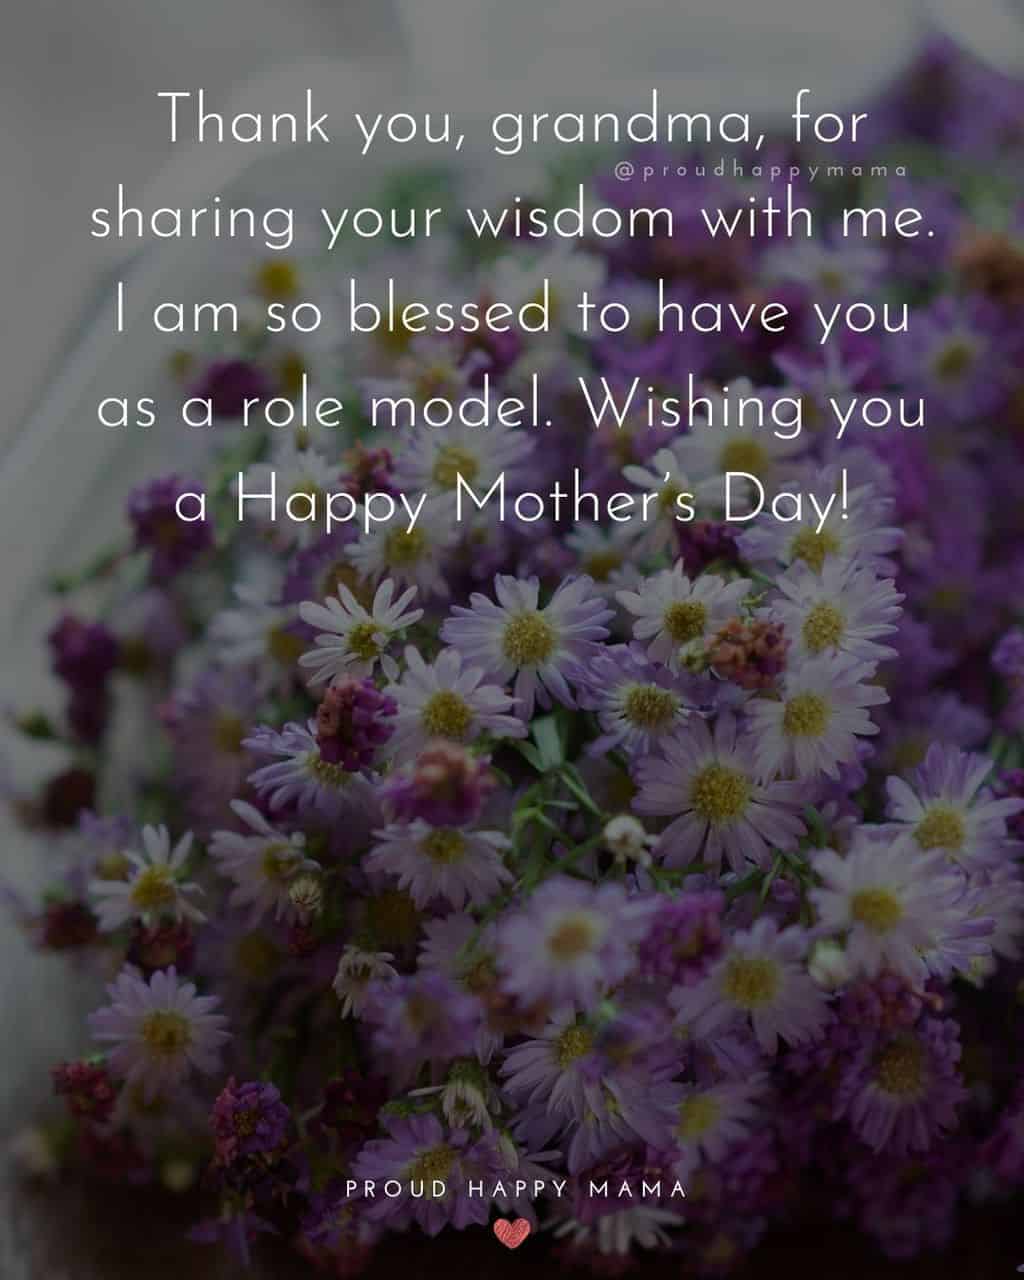 Happy Mothers Day Quotes To Grandma - Thank you, grandma, for sharing your wisdom with me. I am so blessed to have you as